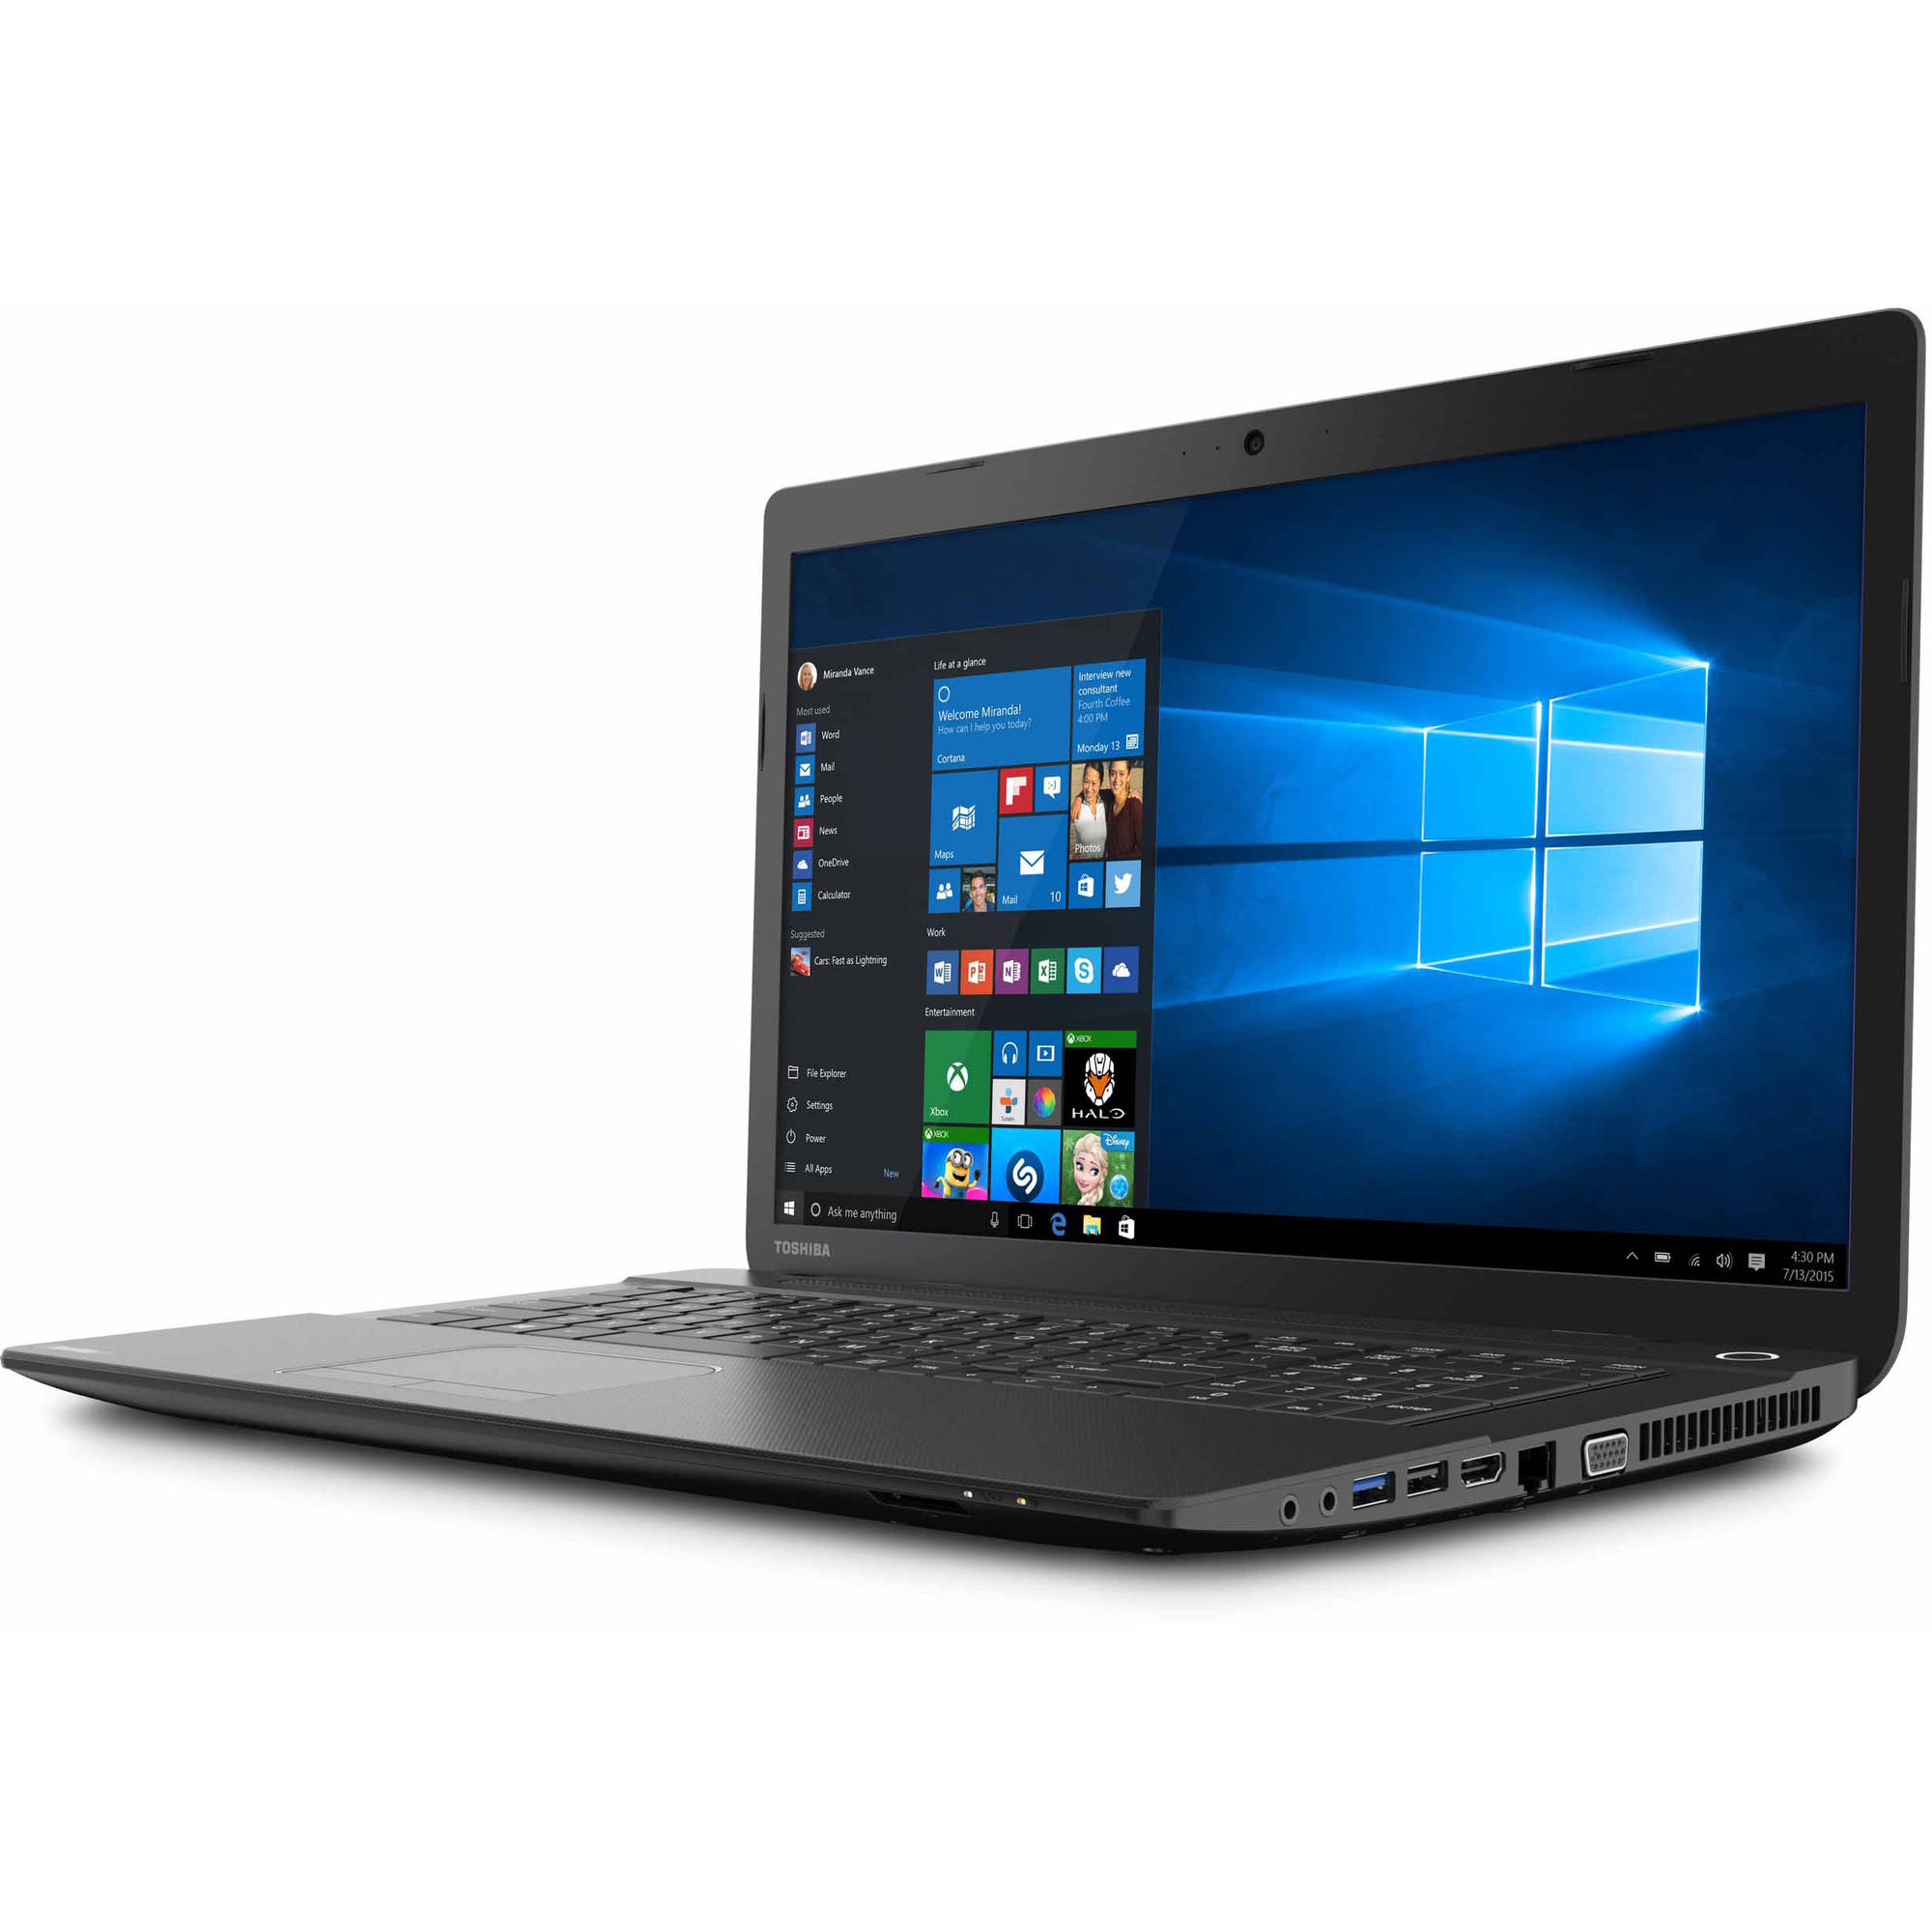 Toshiba Satellite C75D-B7320 - AMD A8 - 6410 / up to 2.4 GHz - Windows 10 Home - Radeon R5 - 6 GB RAM - 750 GB HDD - DVD SuperMulti - 17.3" 1600 x 900 (HD+) - textured resin in jet black - image 4 of 12